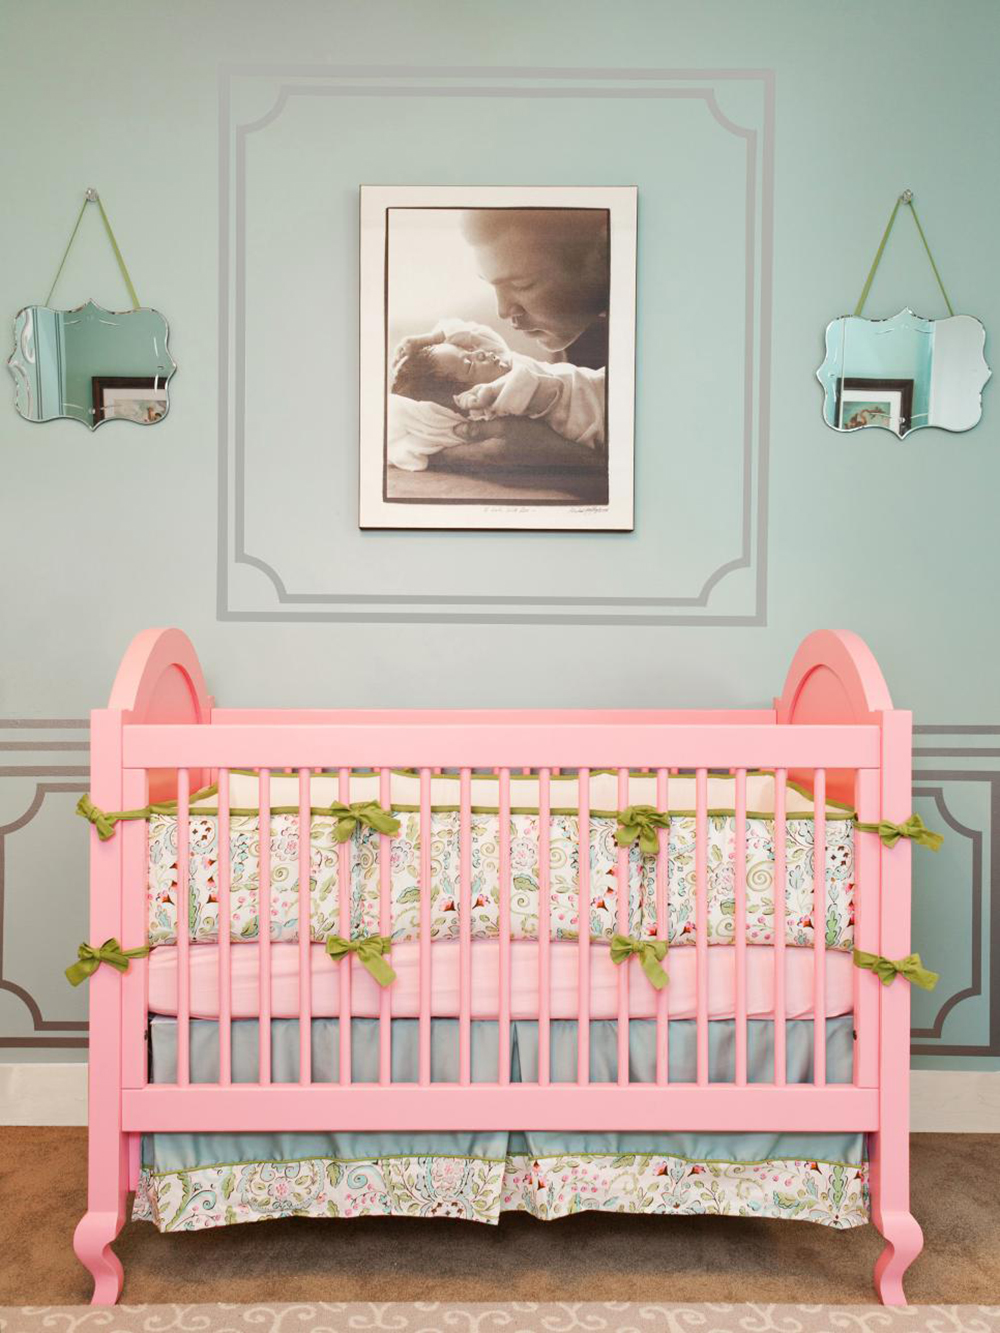 Muhammad Ali – Laila The nursery designed for Laila Ali, daughter of world famous boxer Muhammad Ali is not only beautiful, but also has an amazing tribute to her father Muhammad - a black and white photograph of Muhammad and Laila taking pride of place above the cot.